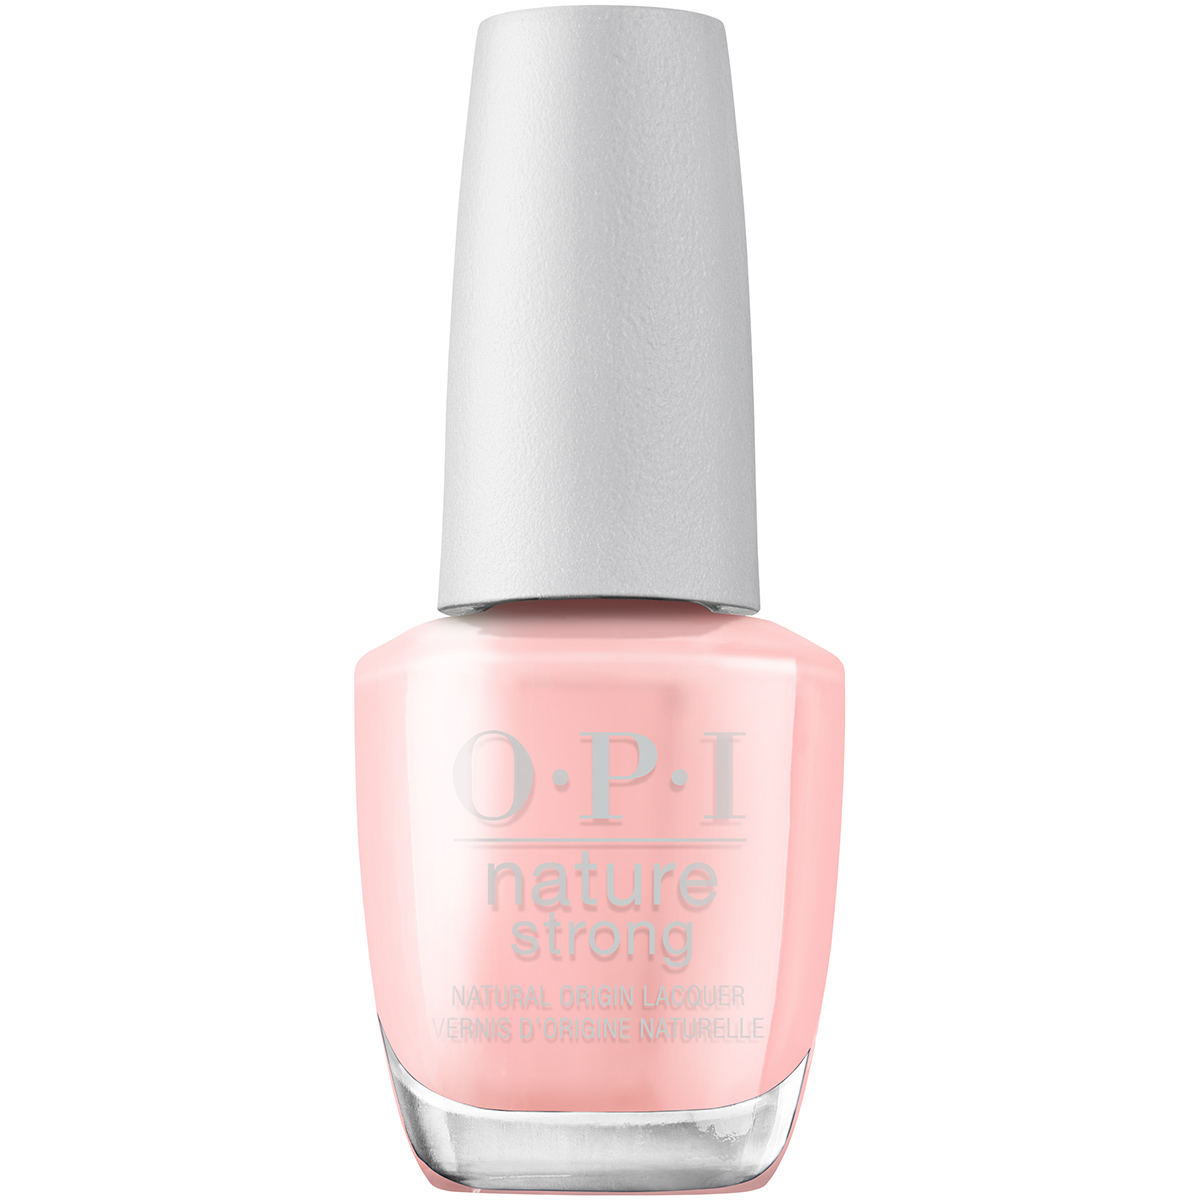 Lac de unghii Nature Strong, We Canyon do Better 15 ml, Opi